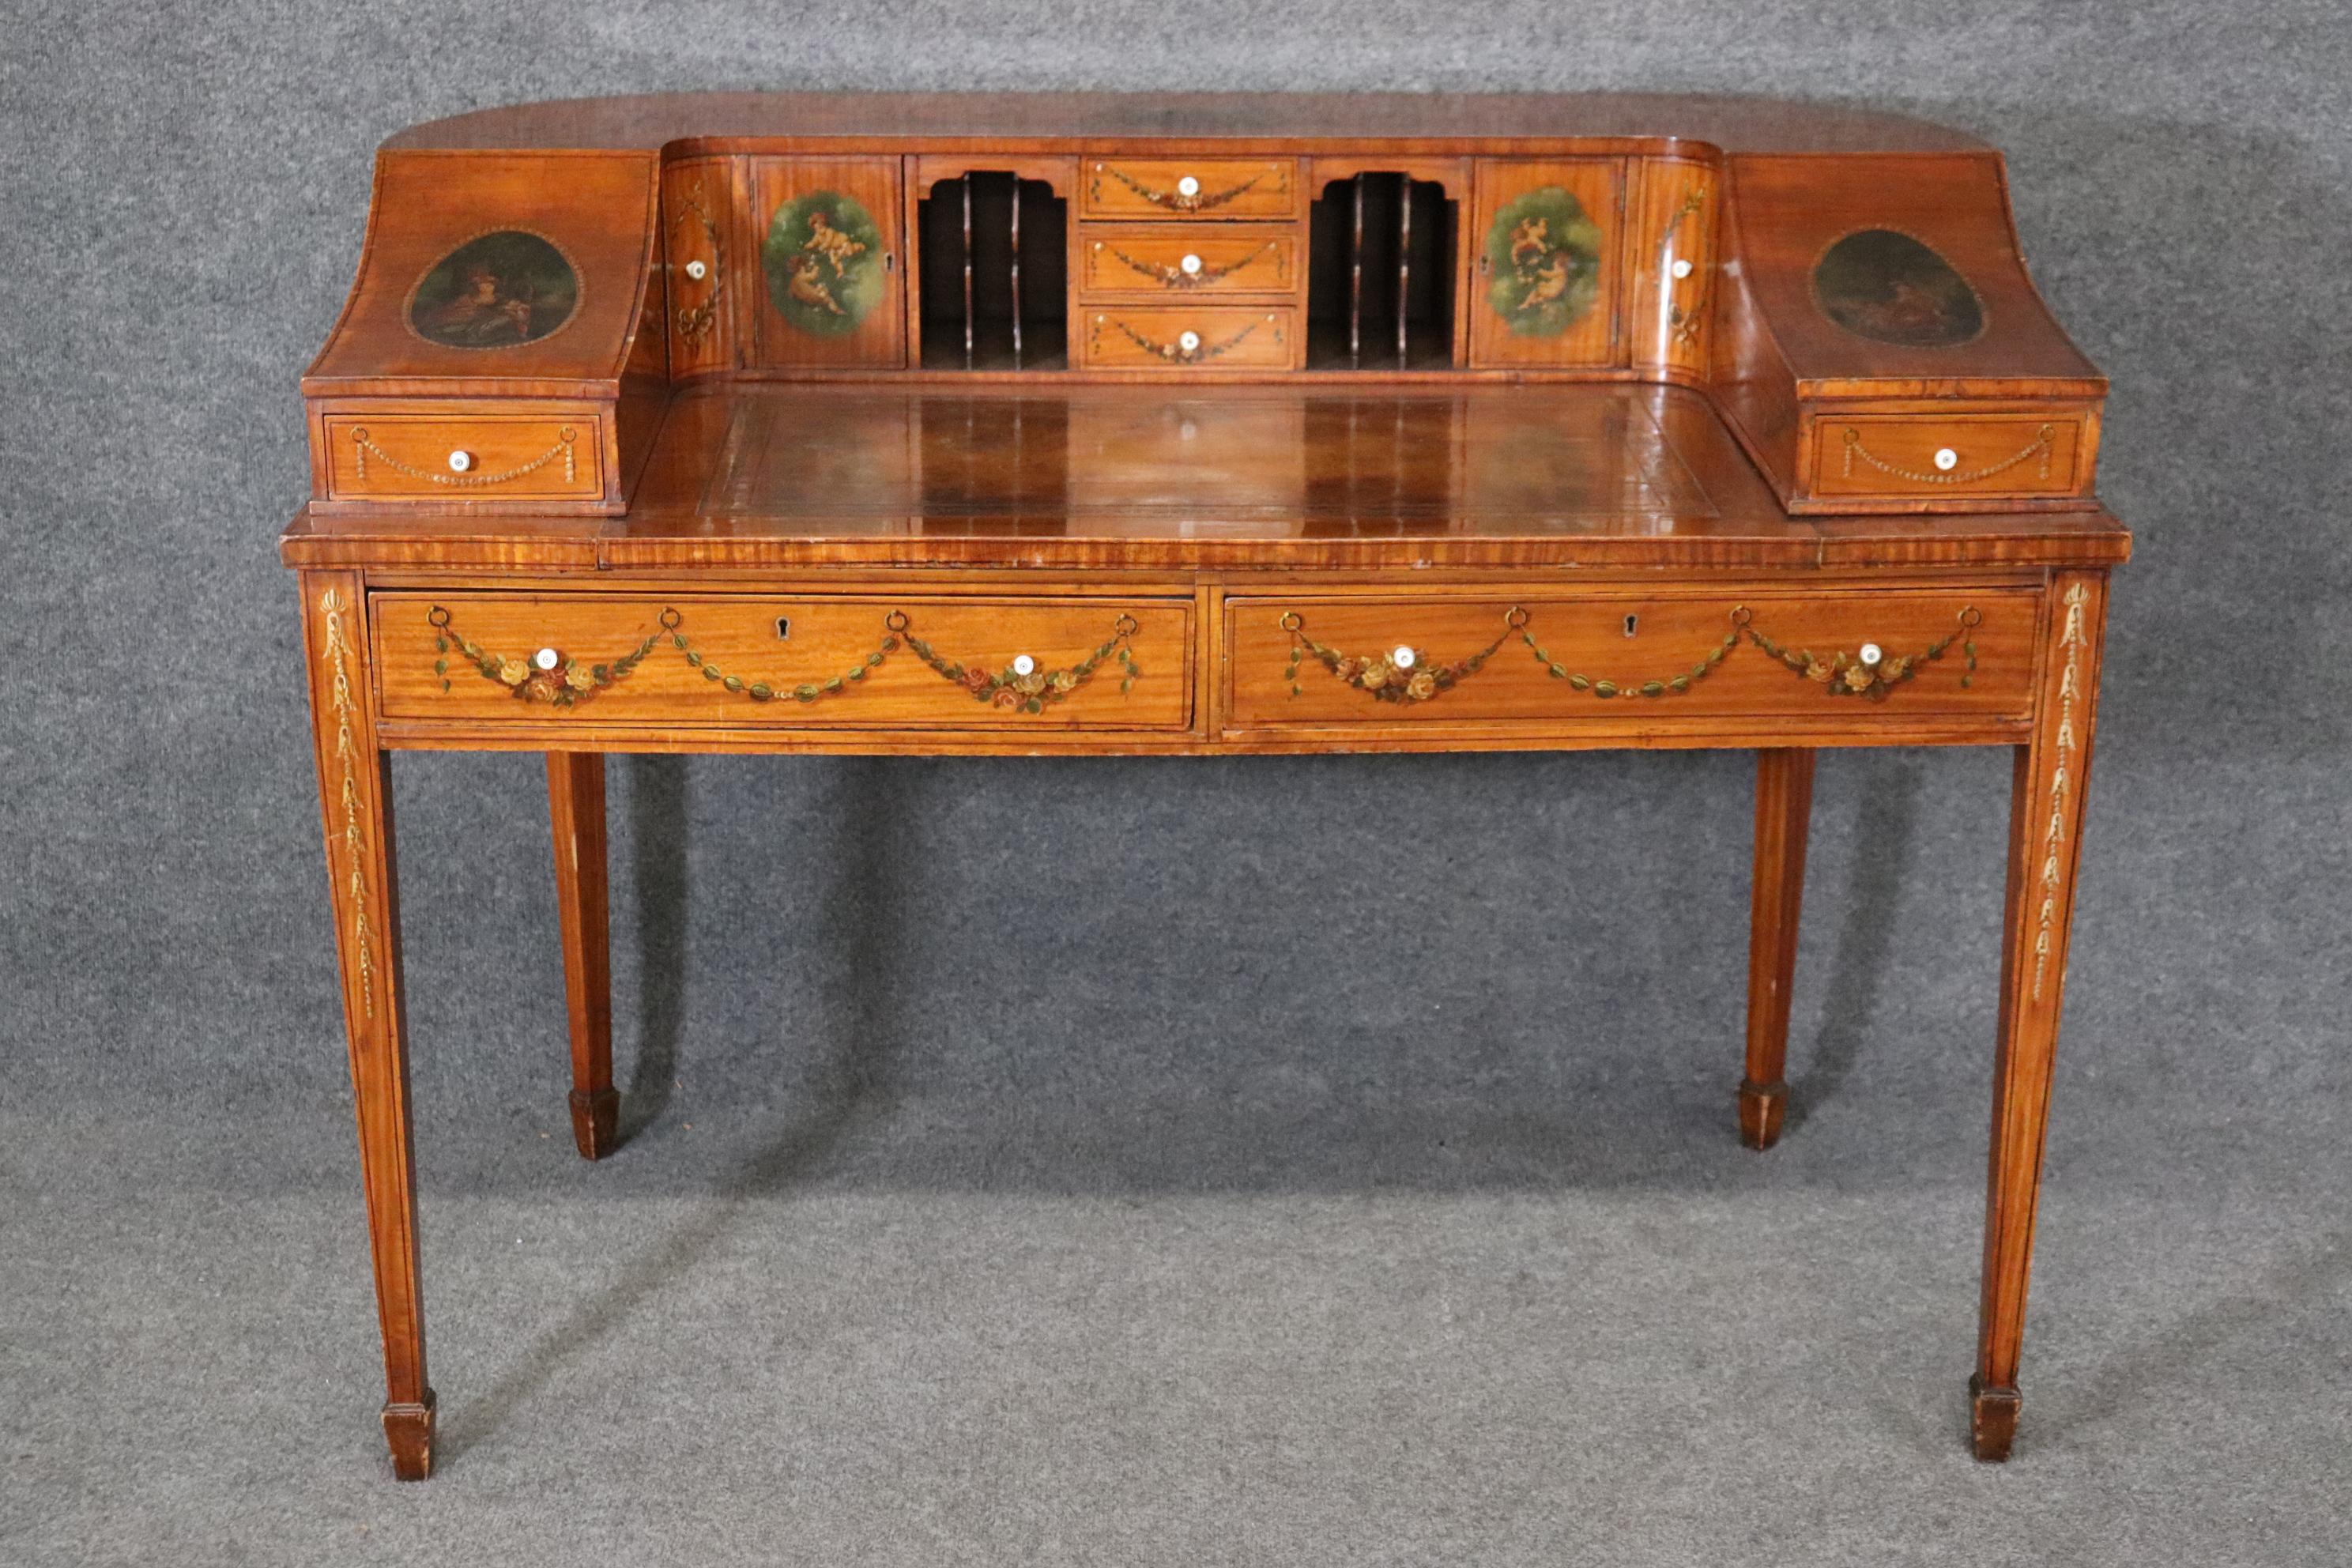 Fine Quality English Satinwood Carlton House Desk with Cherubs and Musical Theme For Sale 2